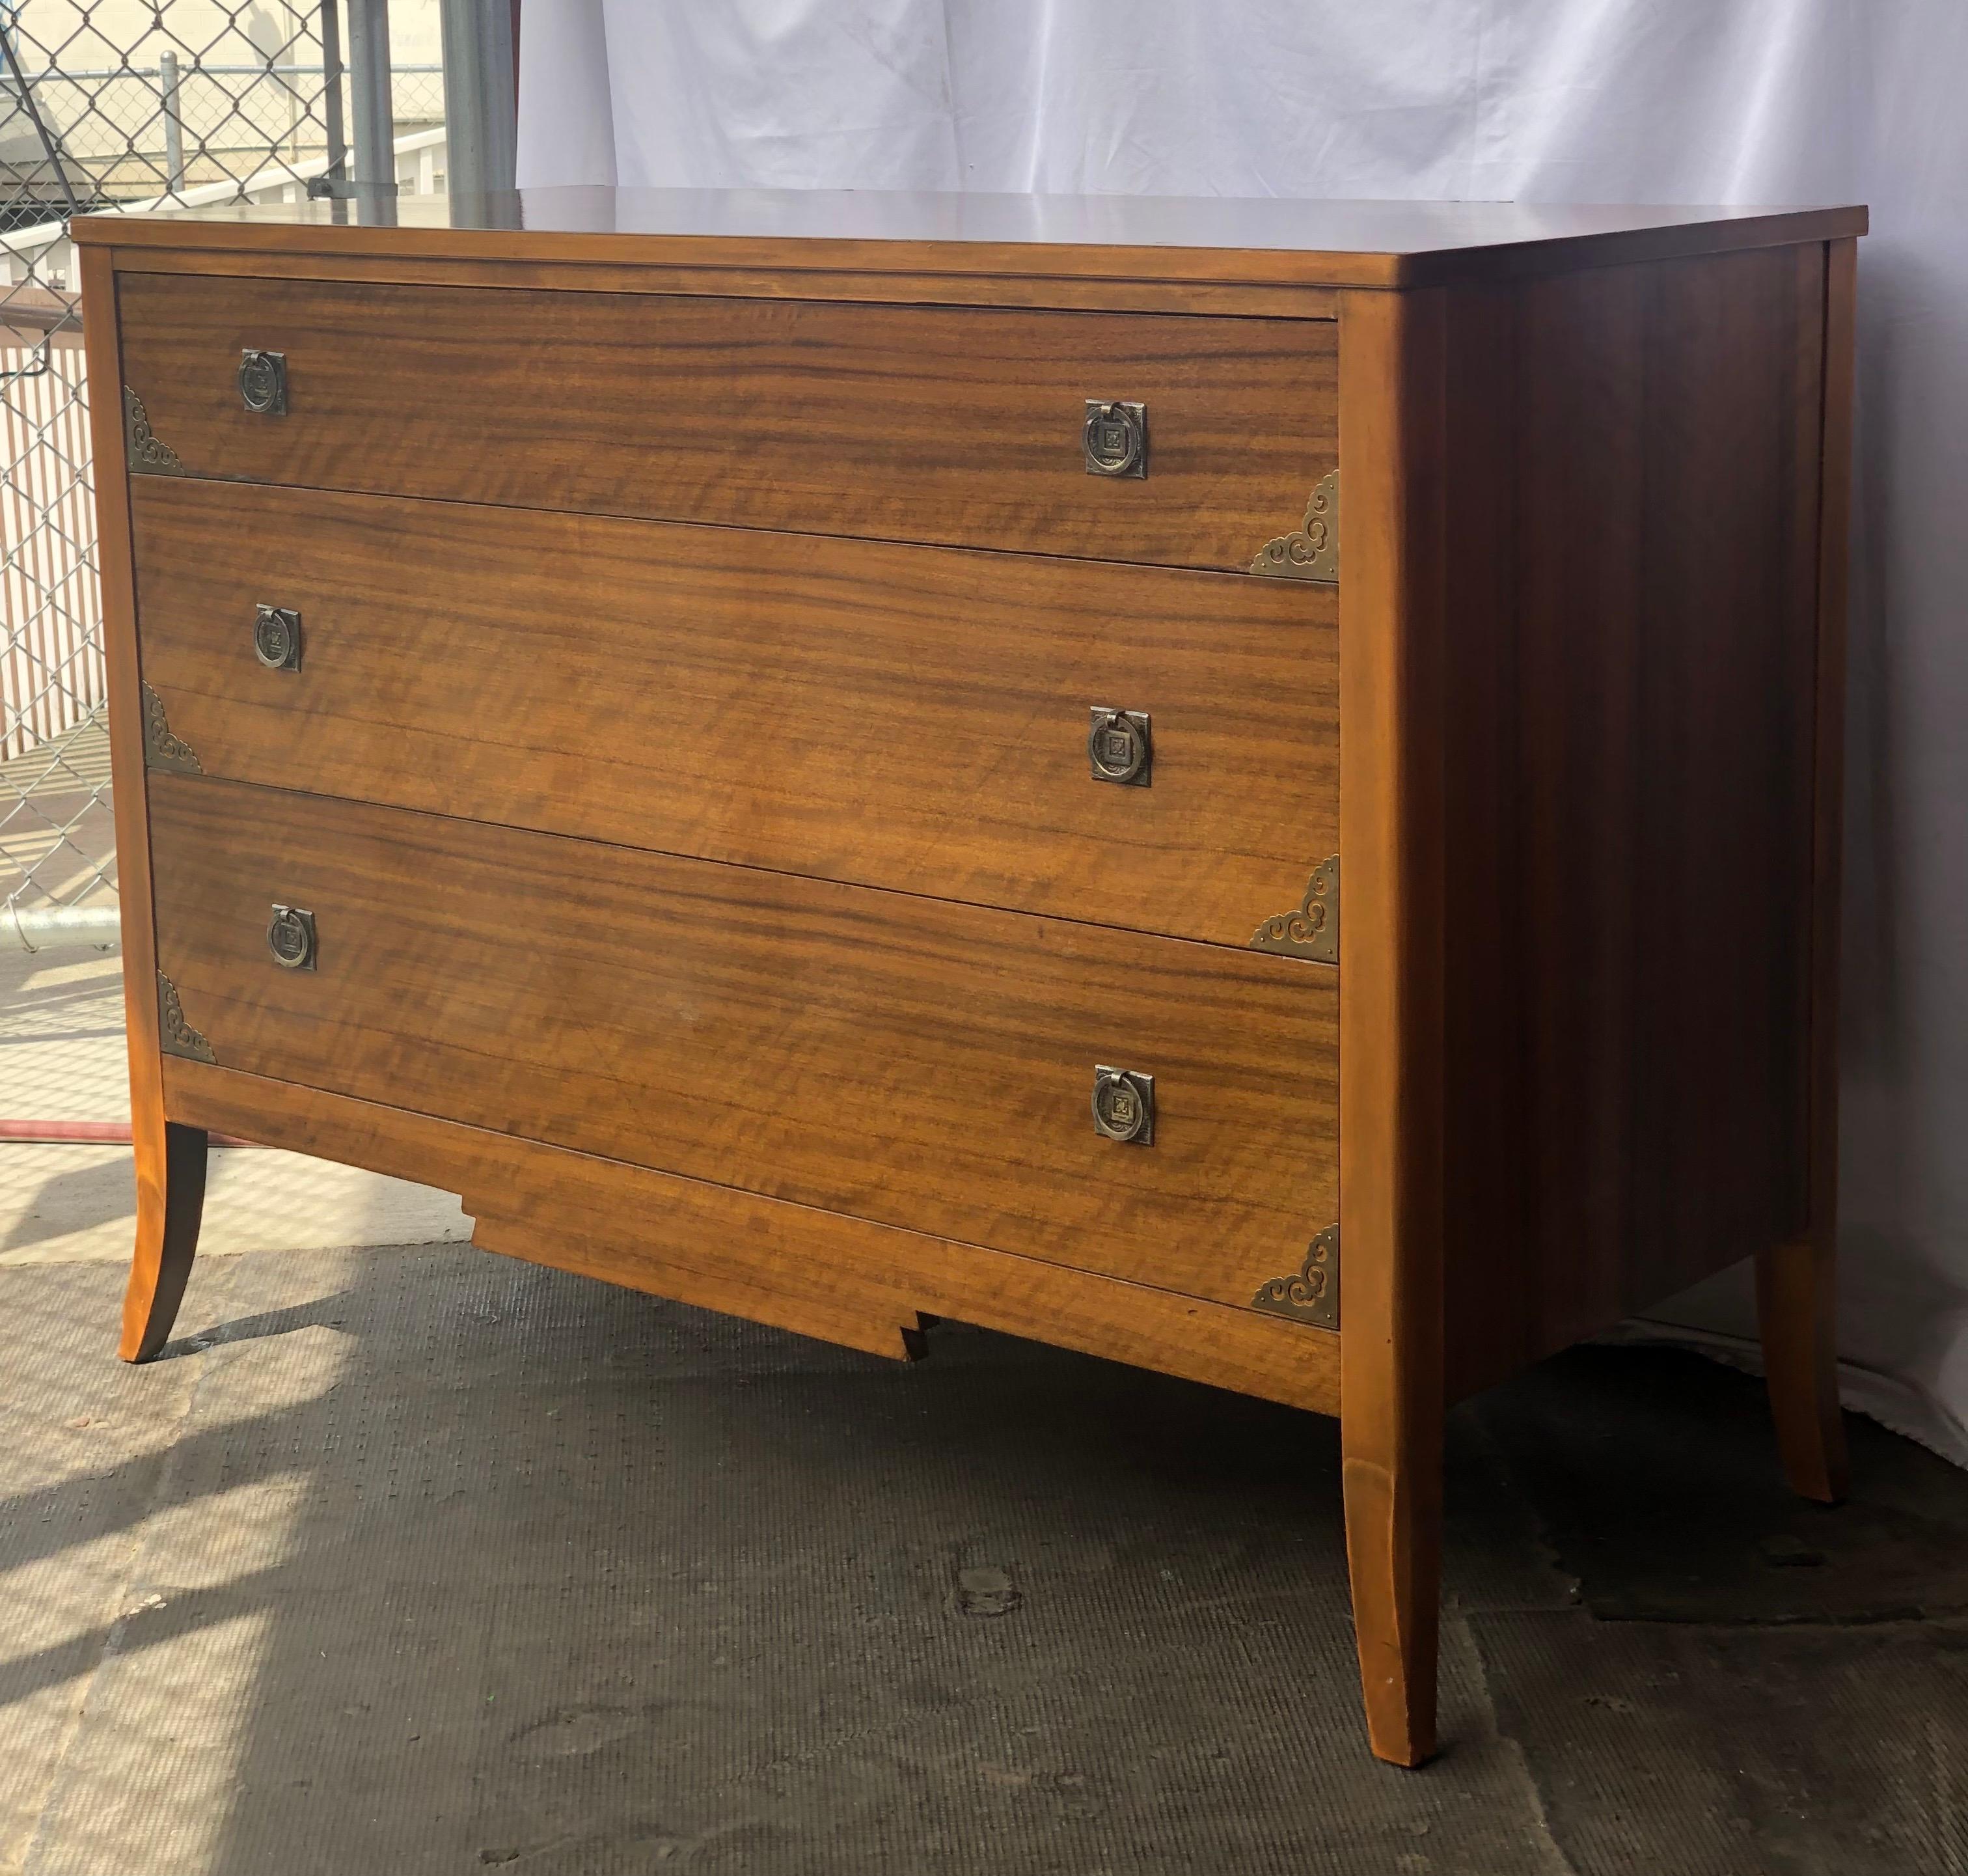 Vintage dresser in walnut and Oak with brass accent. Sturdy and sleek design with original hardware.